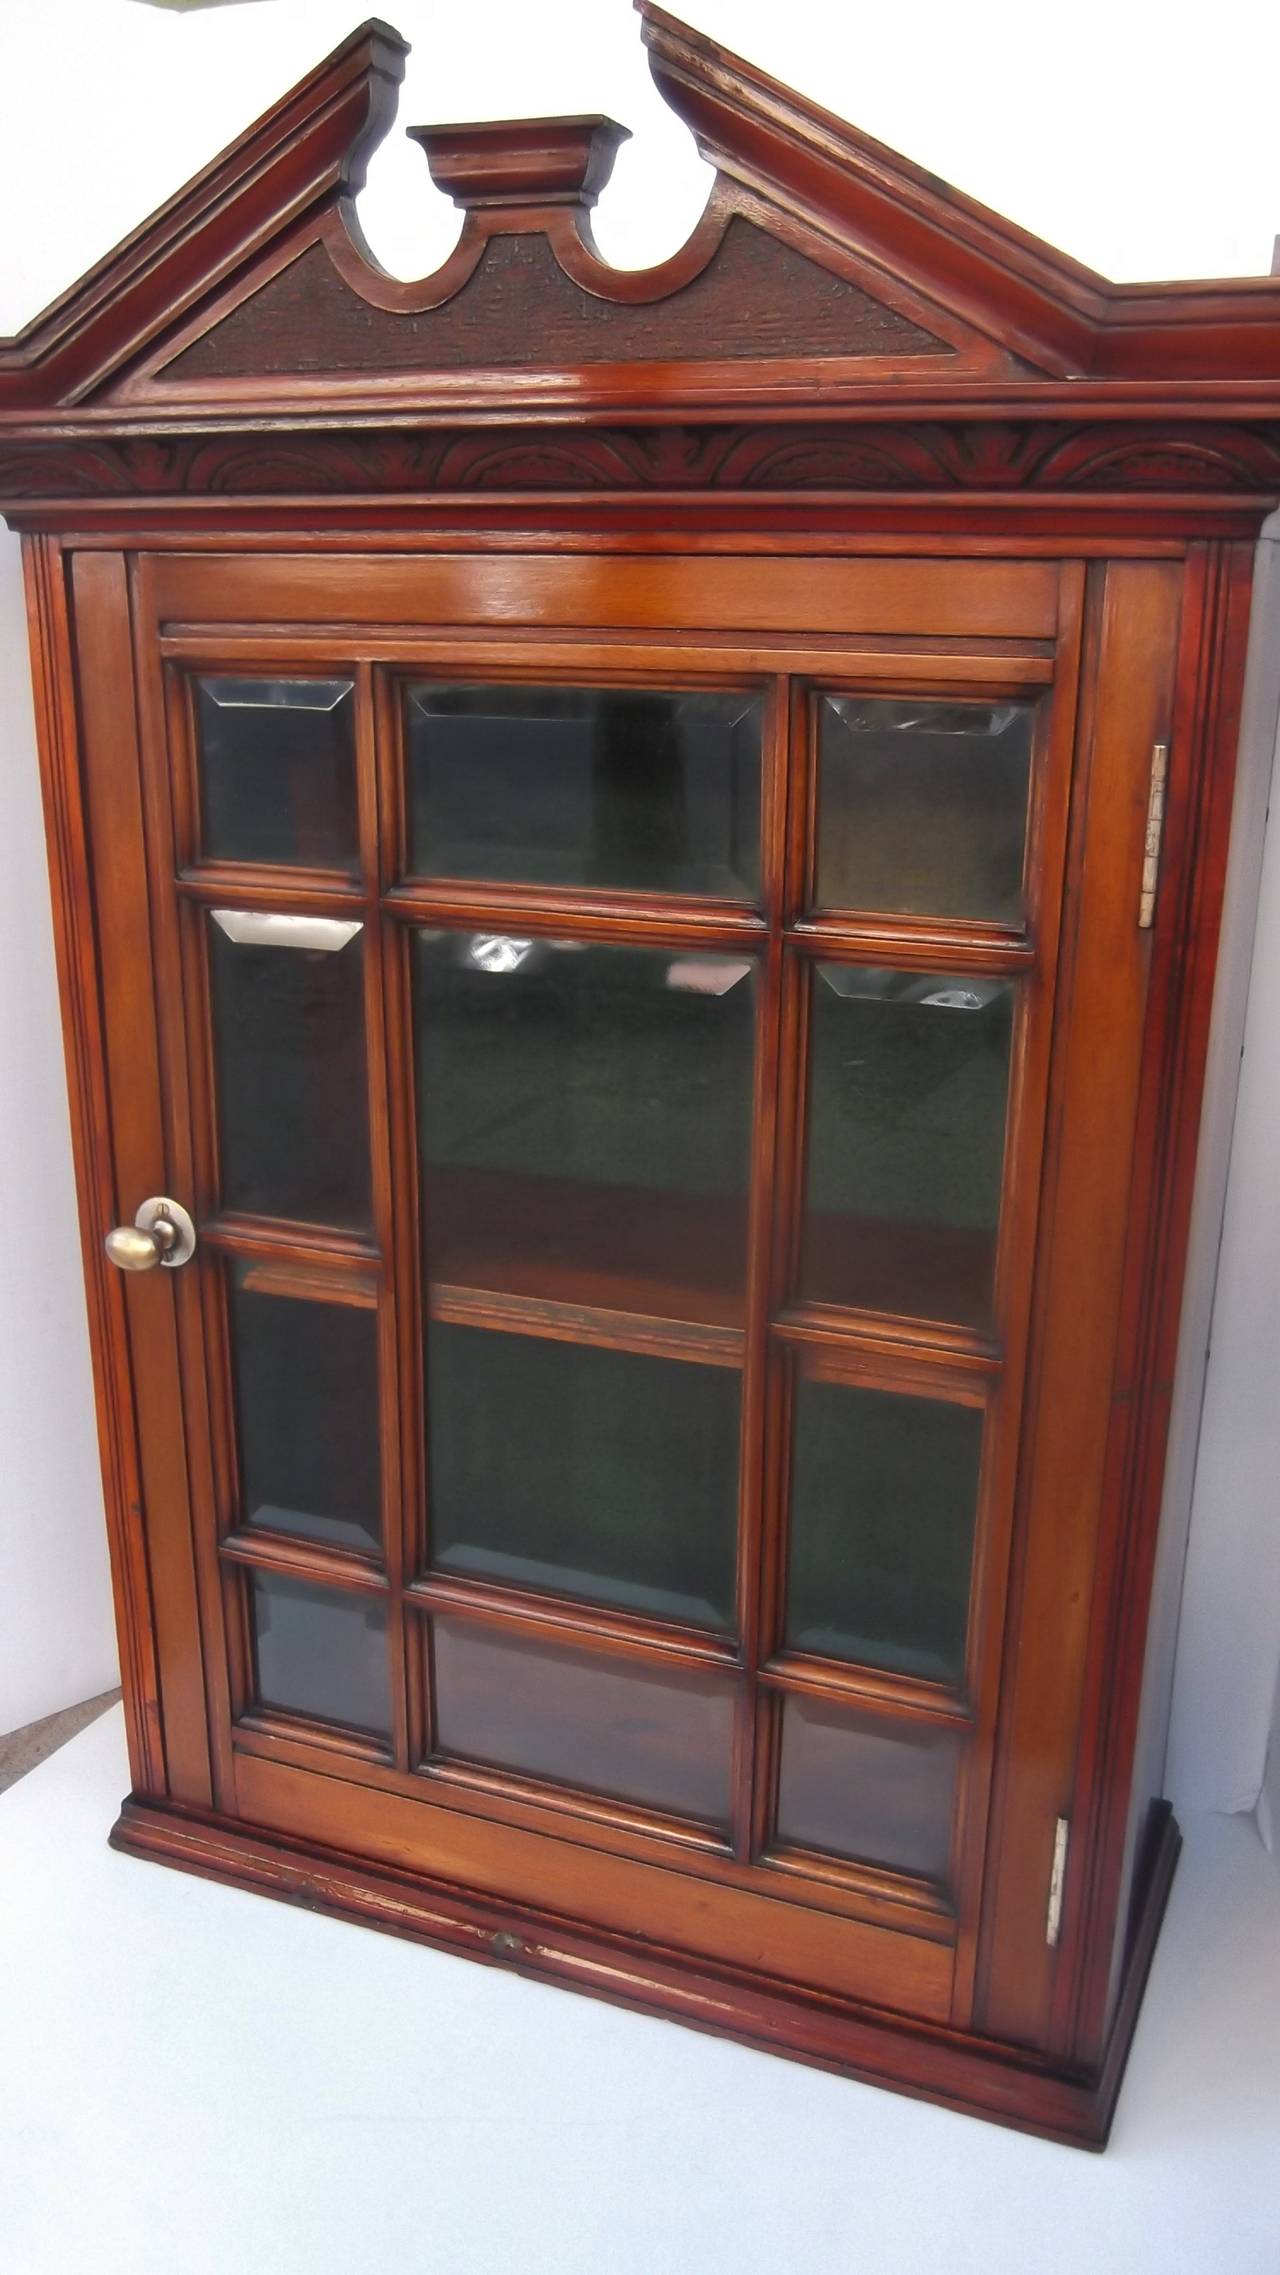 A fine mahogany portable curio cabinet with hand beveled individual glass panels. Classic Georgian style pediment top with carved detailing.  This can also hang on a wall by the added sturdy metal braces.  The display area has 2 wood shelves.